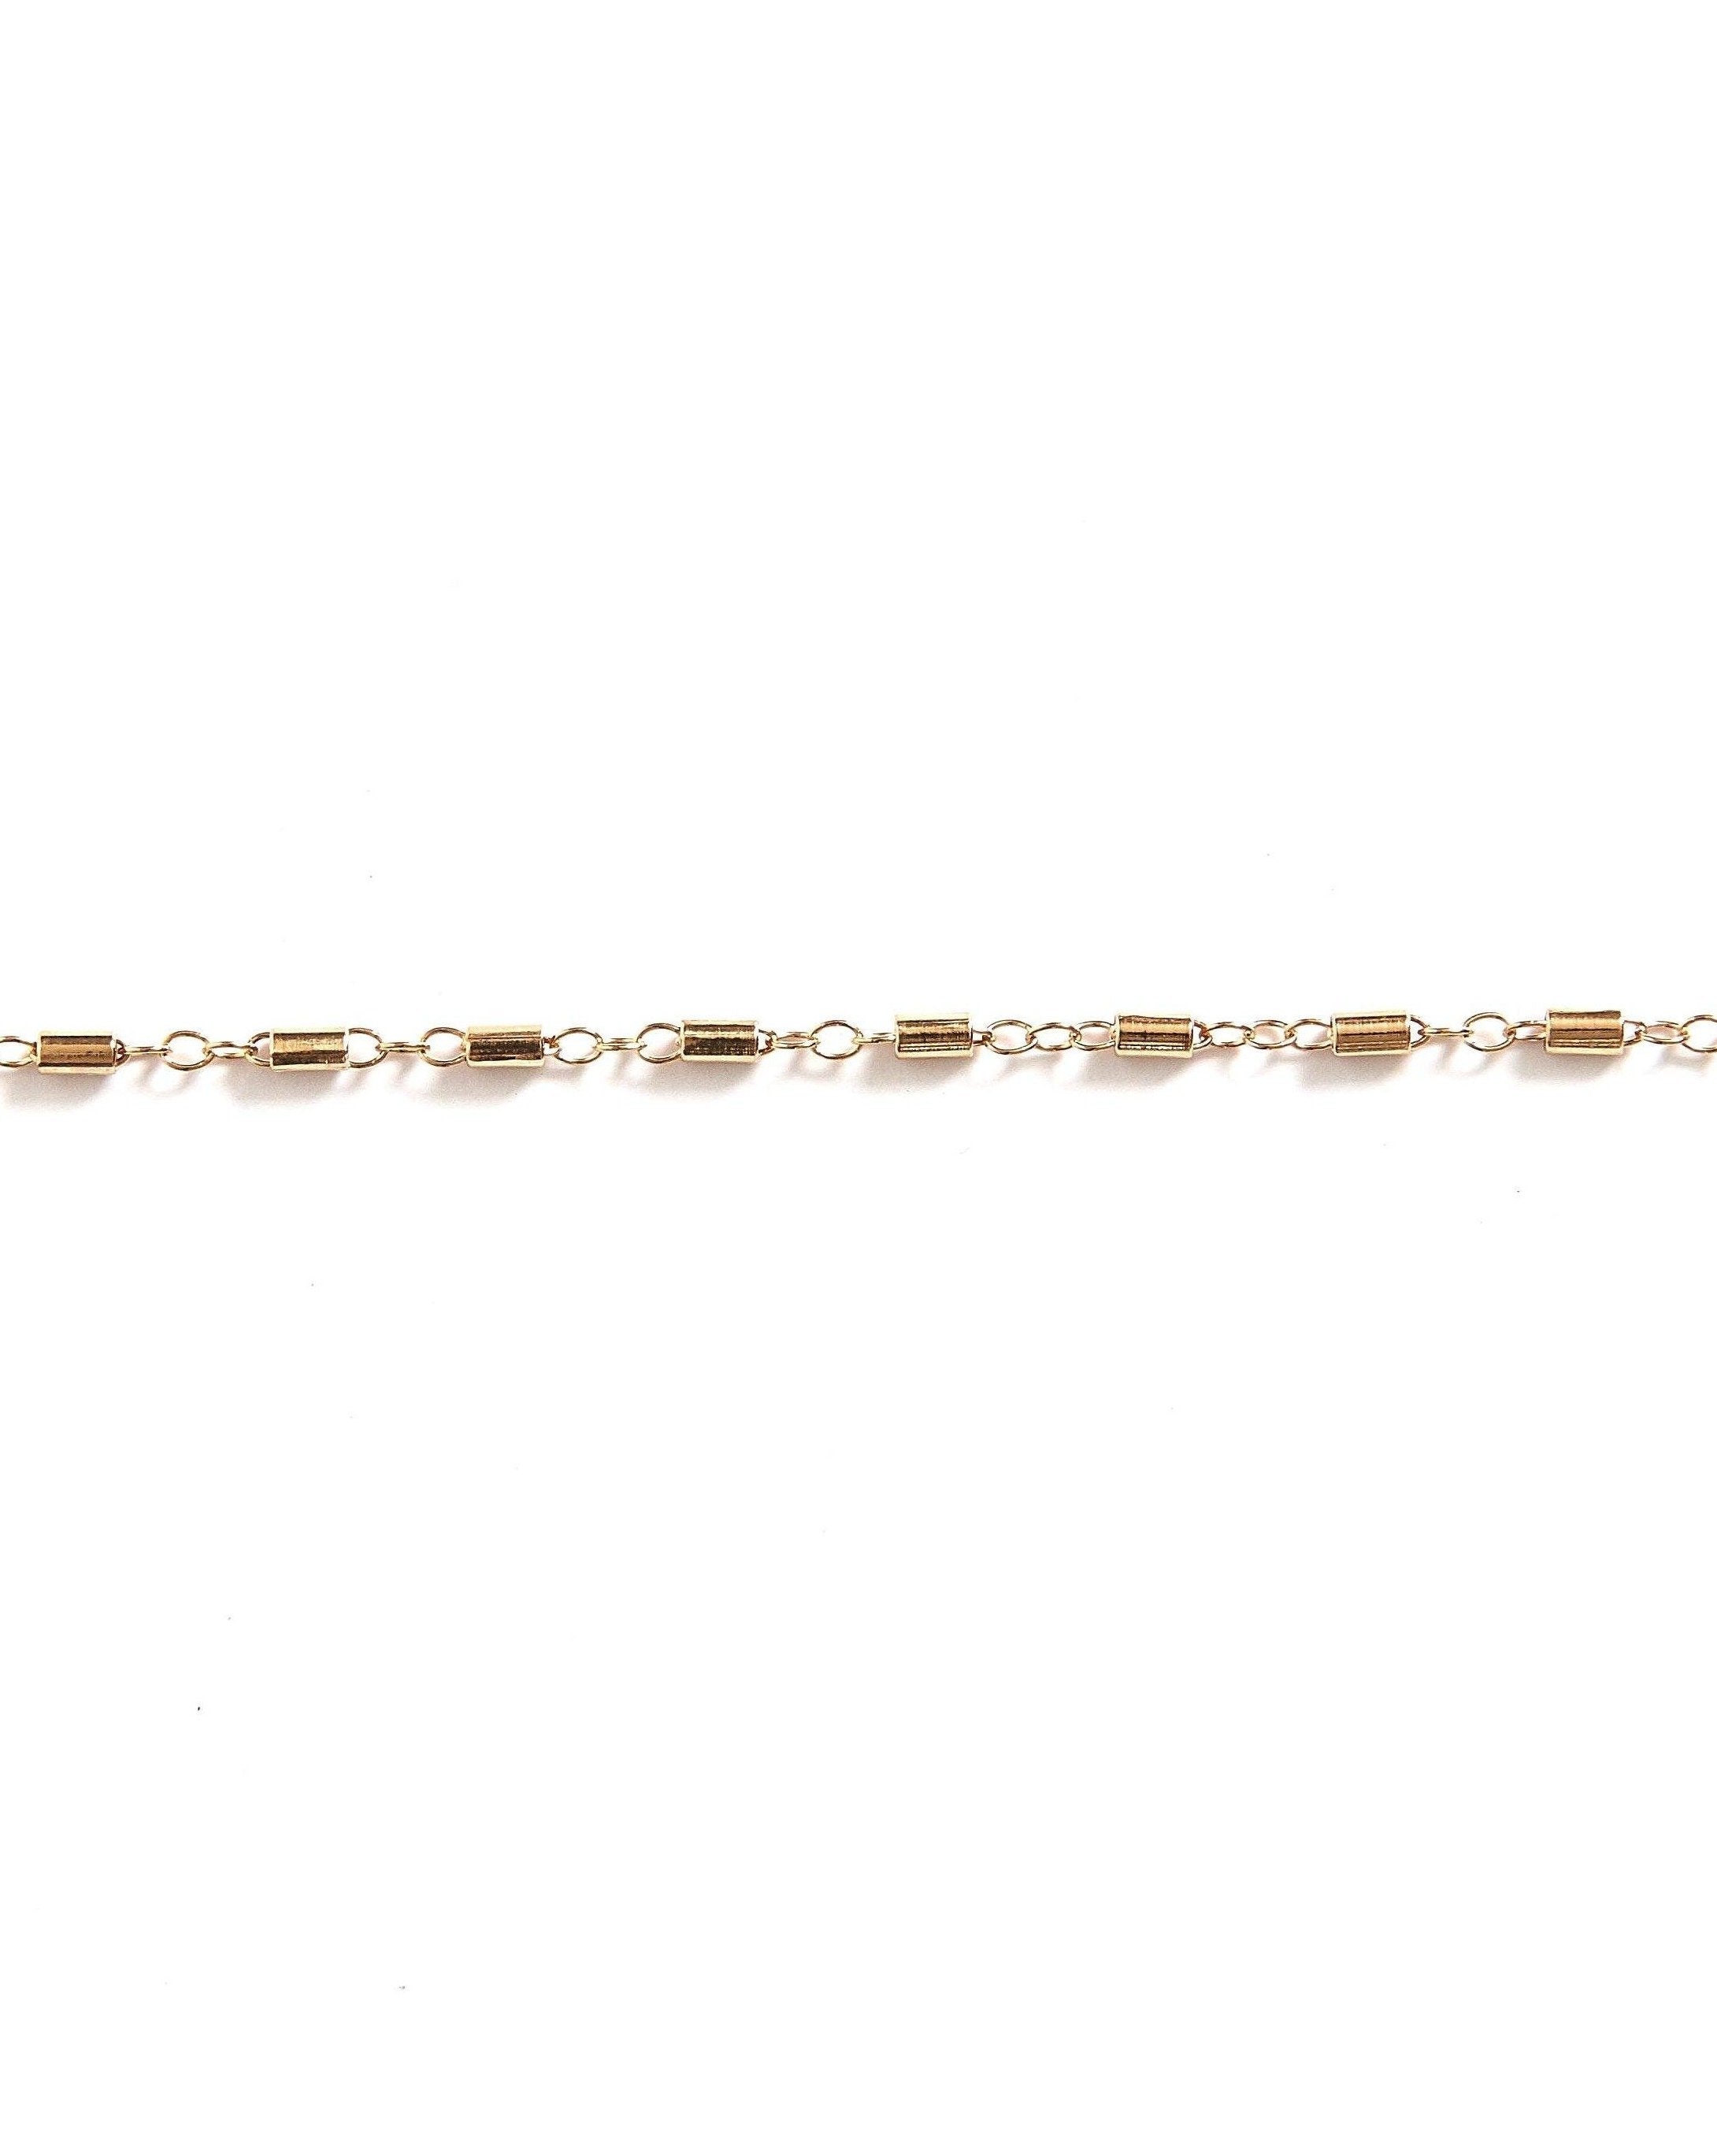 Cyla Choker by KOZAKH. A 12 to 14 inch adjustable length, tube chain choker necklace, crafted in 14K Gold Filled.